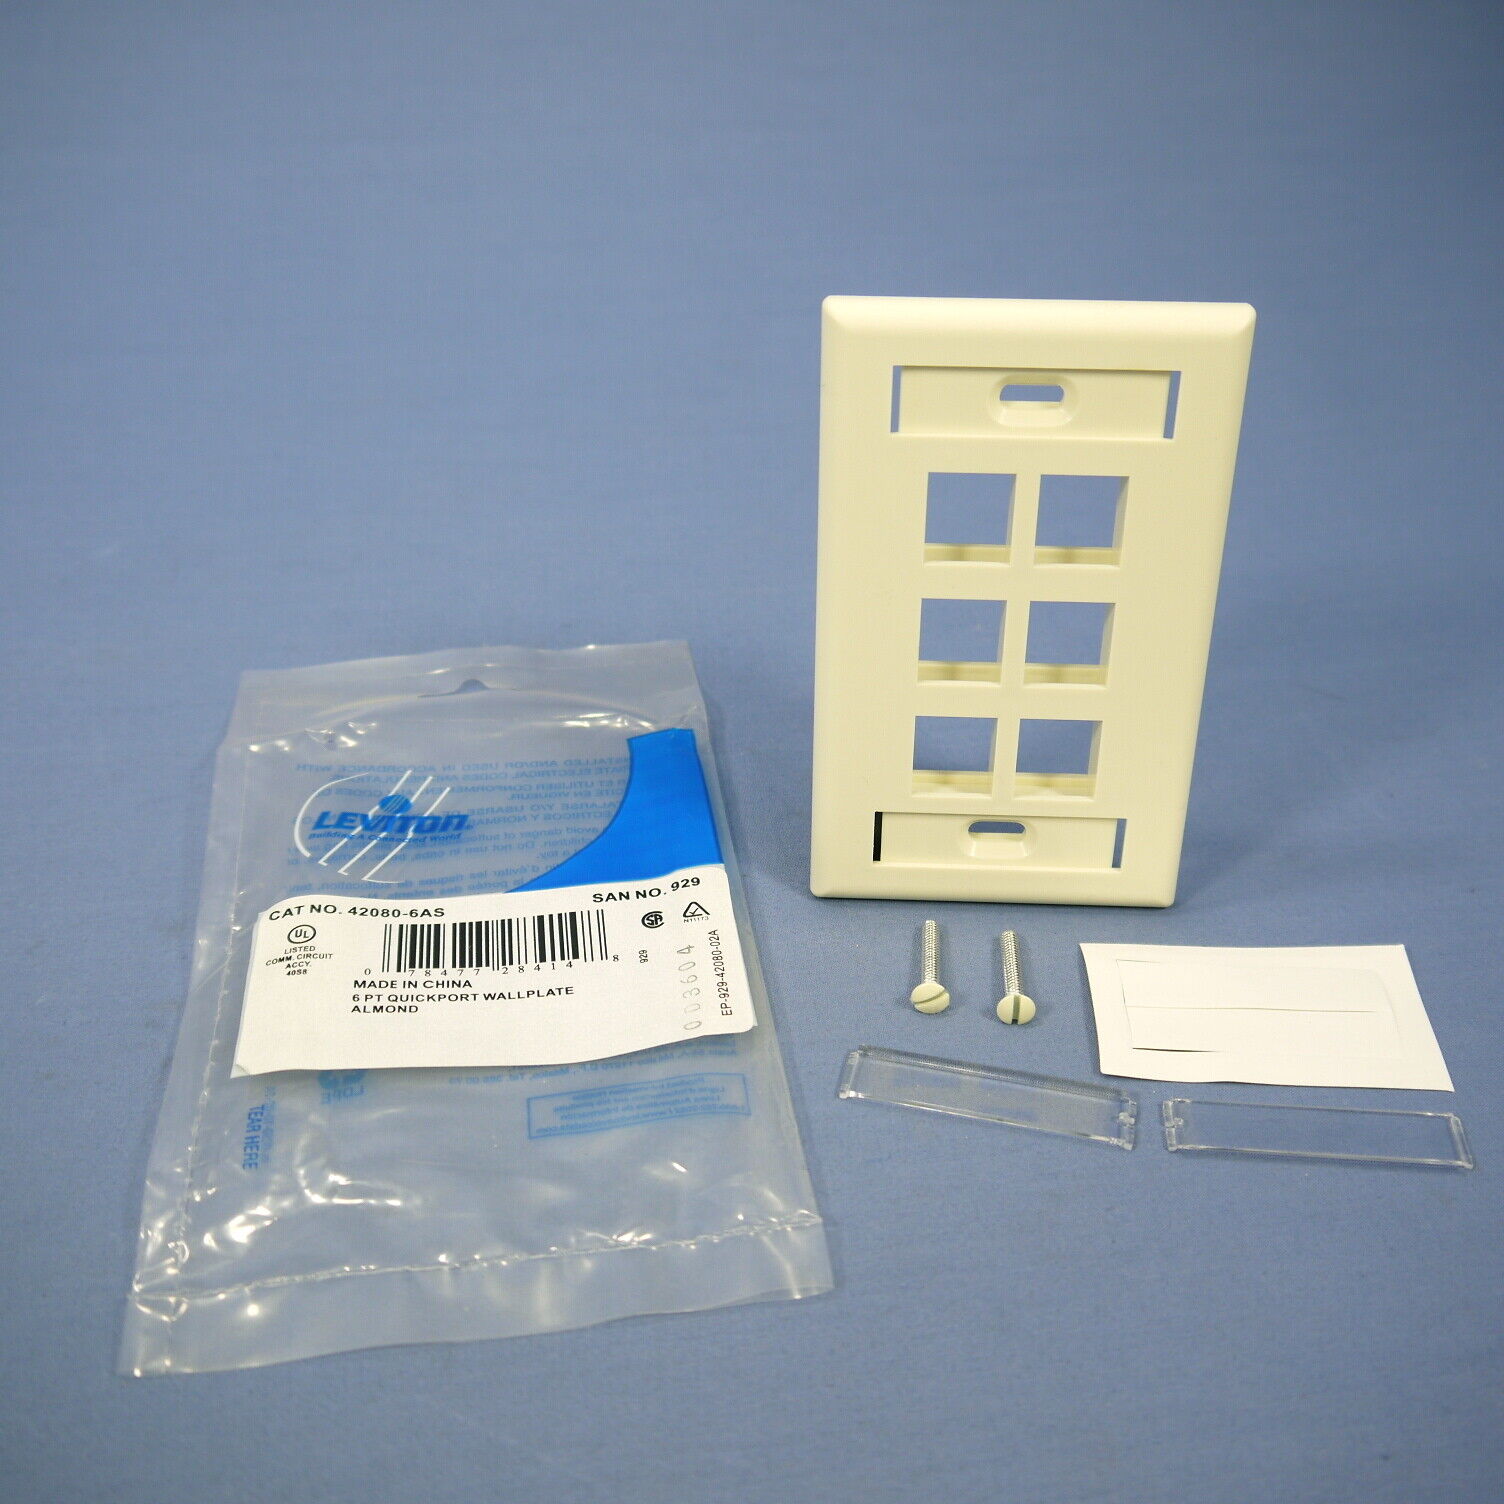 Leviton Almond Quickport 6-Port ID Window Flush Wallplate 1-Gang Cover 42080-6AS